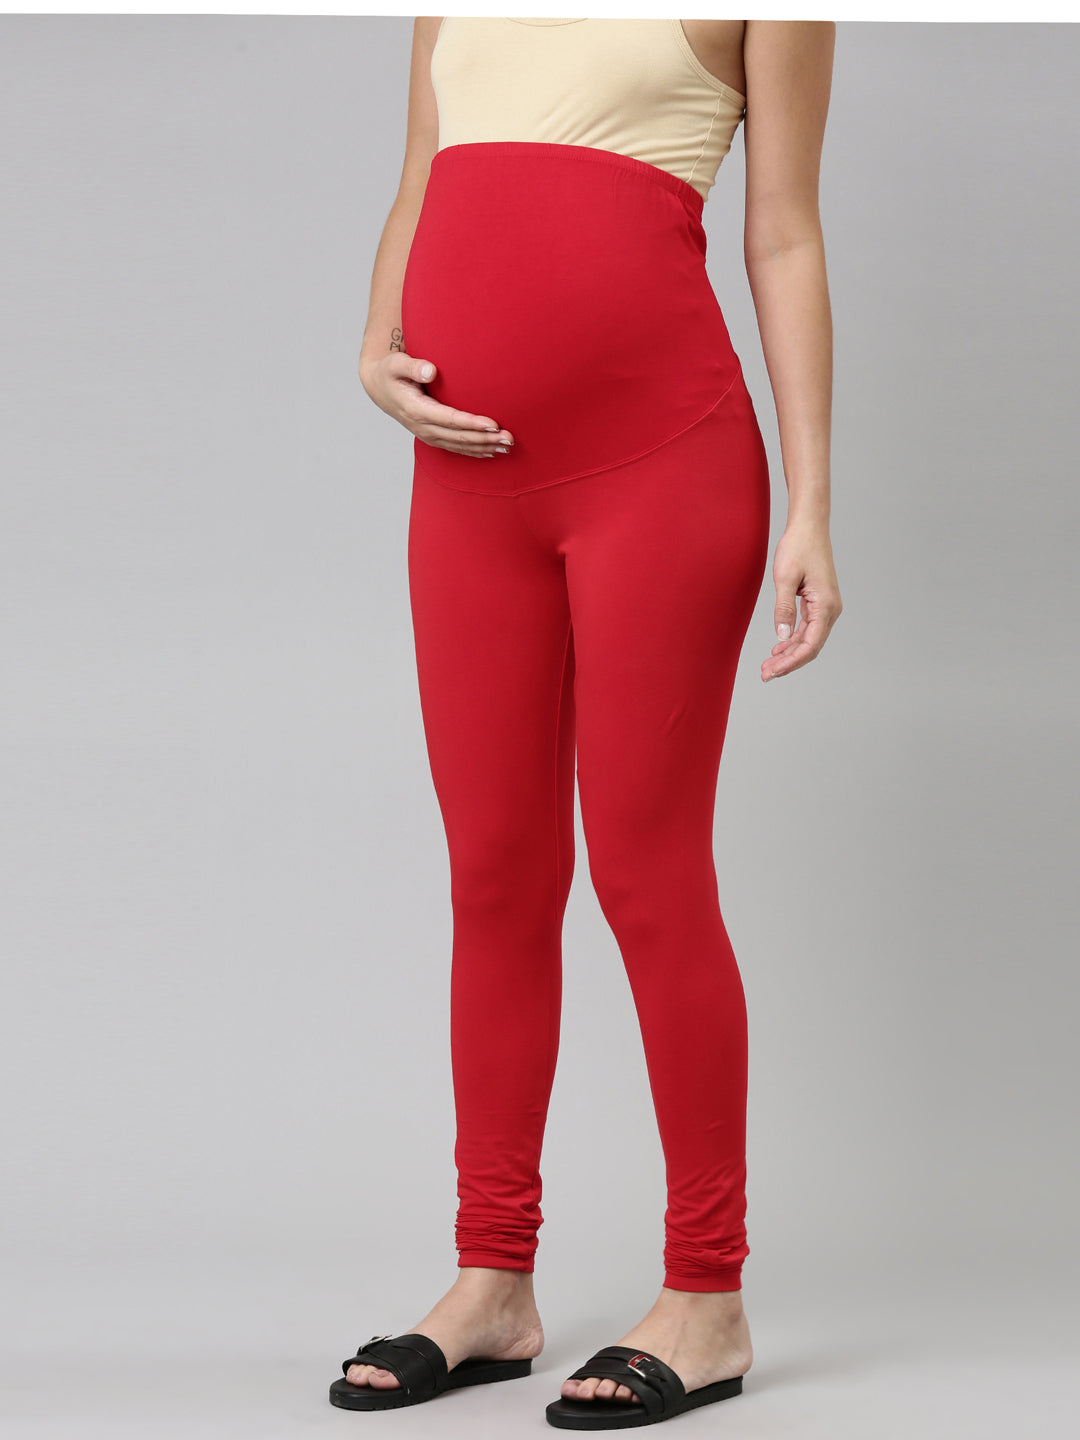 Women's Maternity On The Go-to Legging made with Organic Cotton | Pact